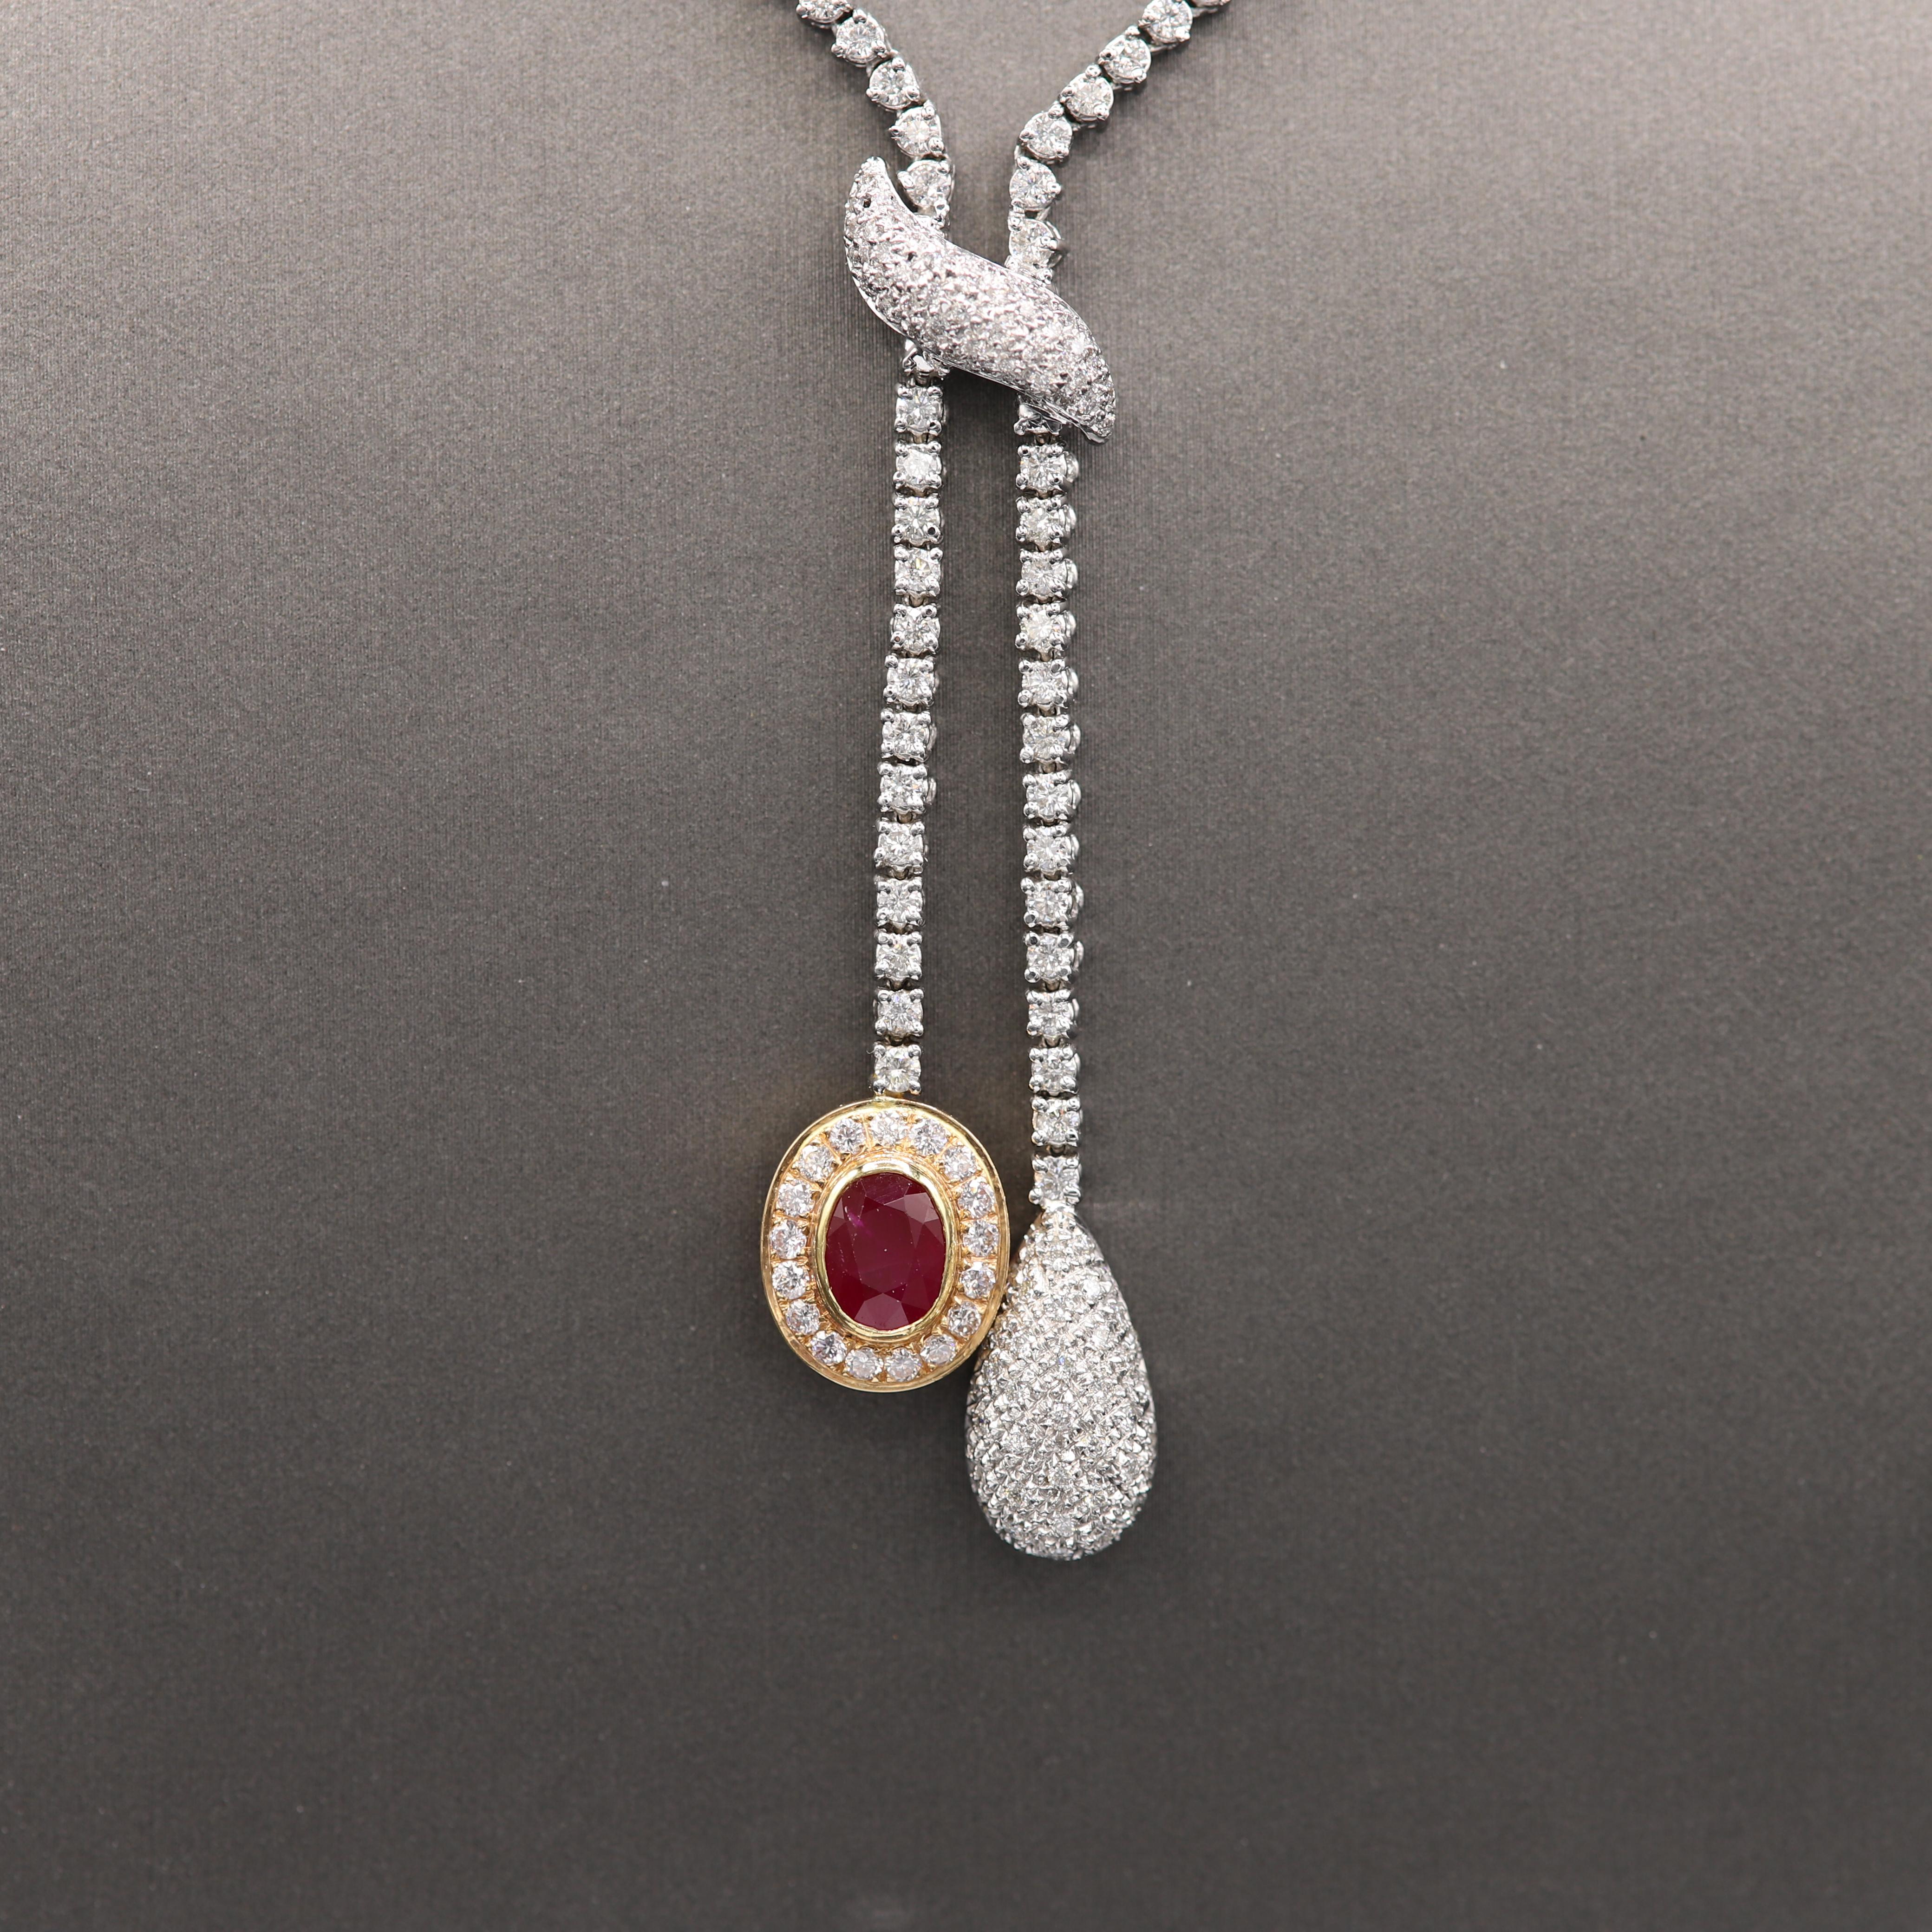 Unique Dangling Ruby and Diamonds
Impressive Elegant & Bold

18k white and some Rose Gold 39 Grams

Necklace neck Length 16' Inch

All Natural Stones *not treated